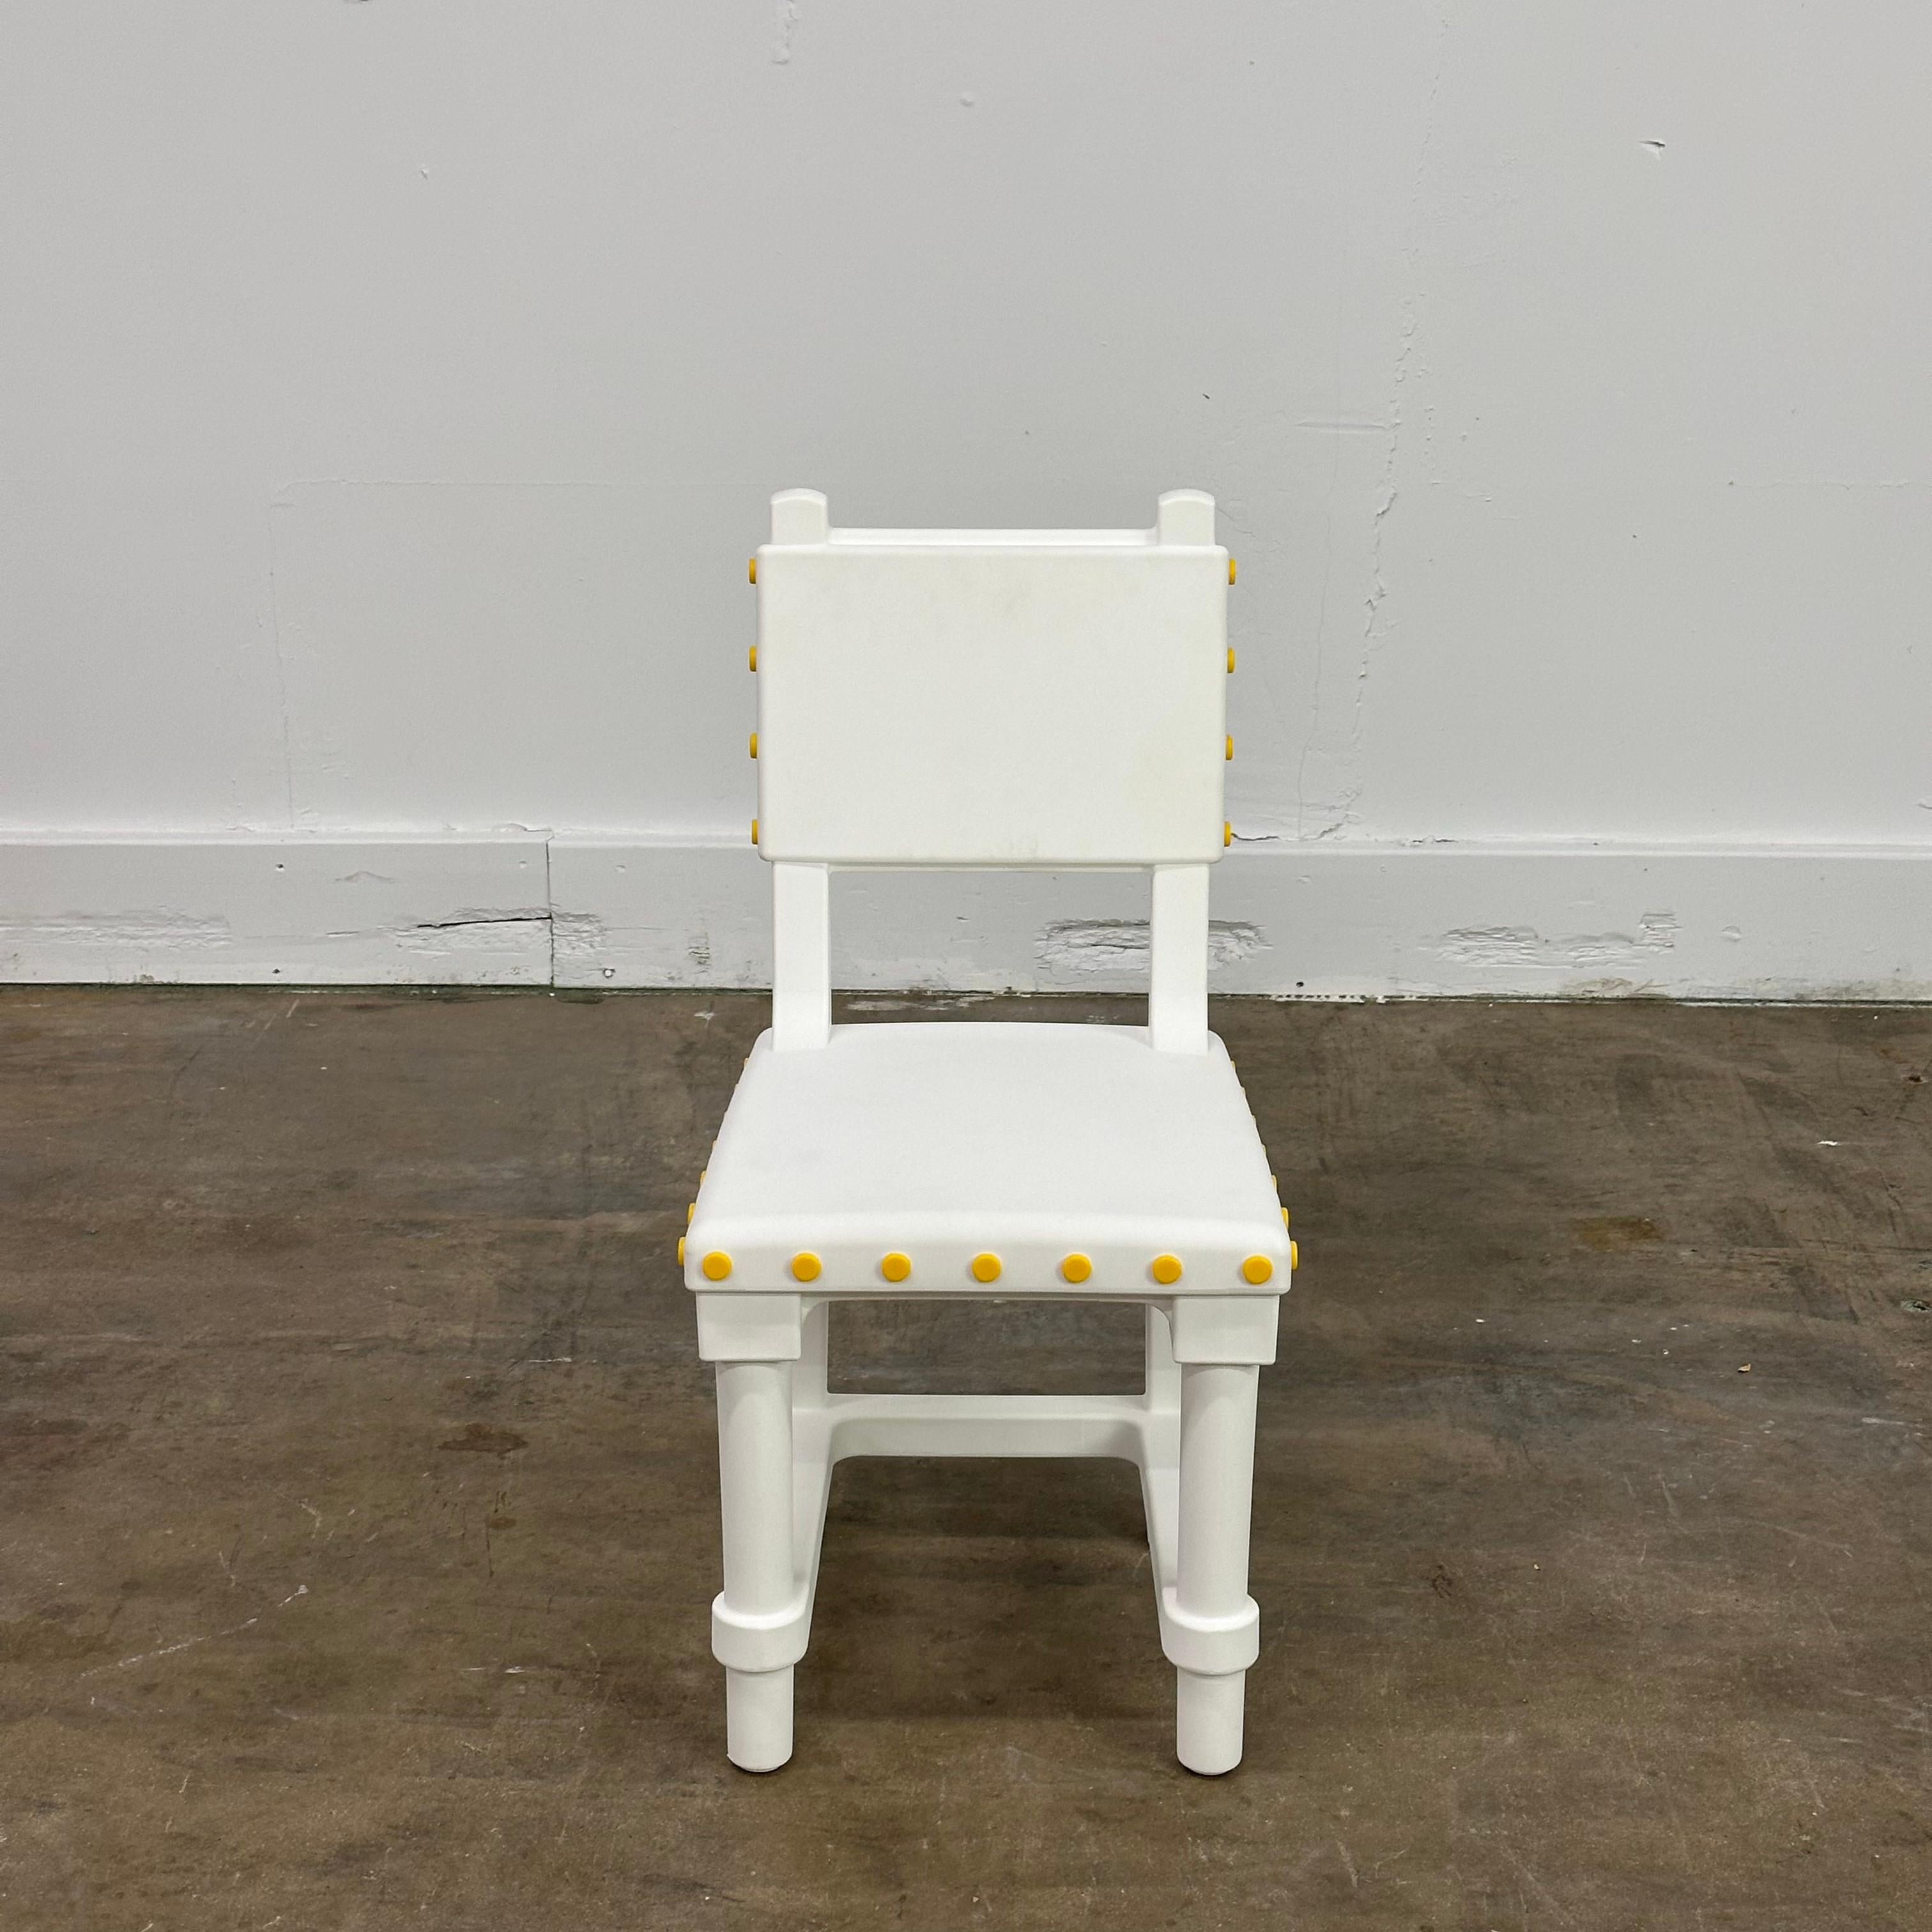 Gothic Chair by Studio Job for Moooi in white plastic with yellow accent details.